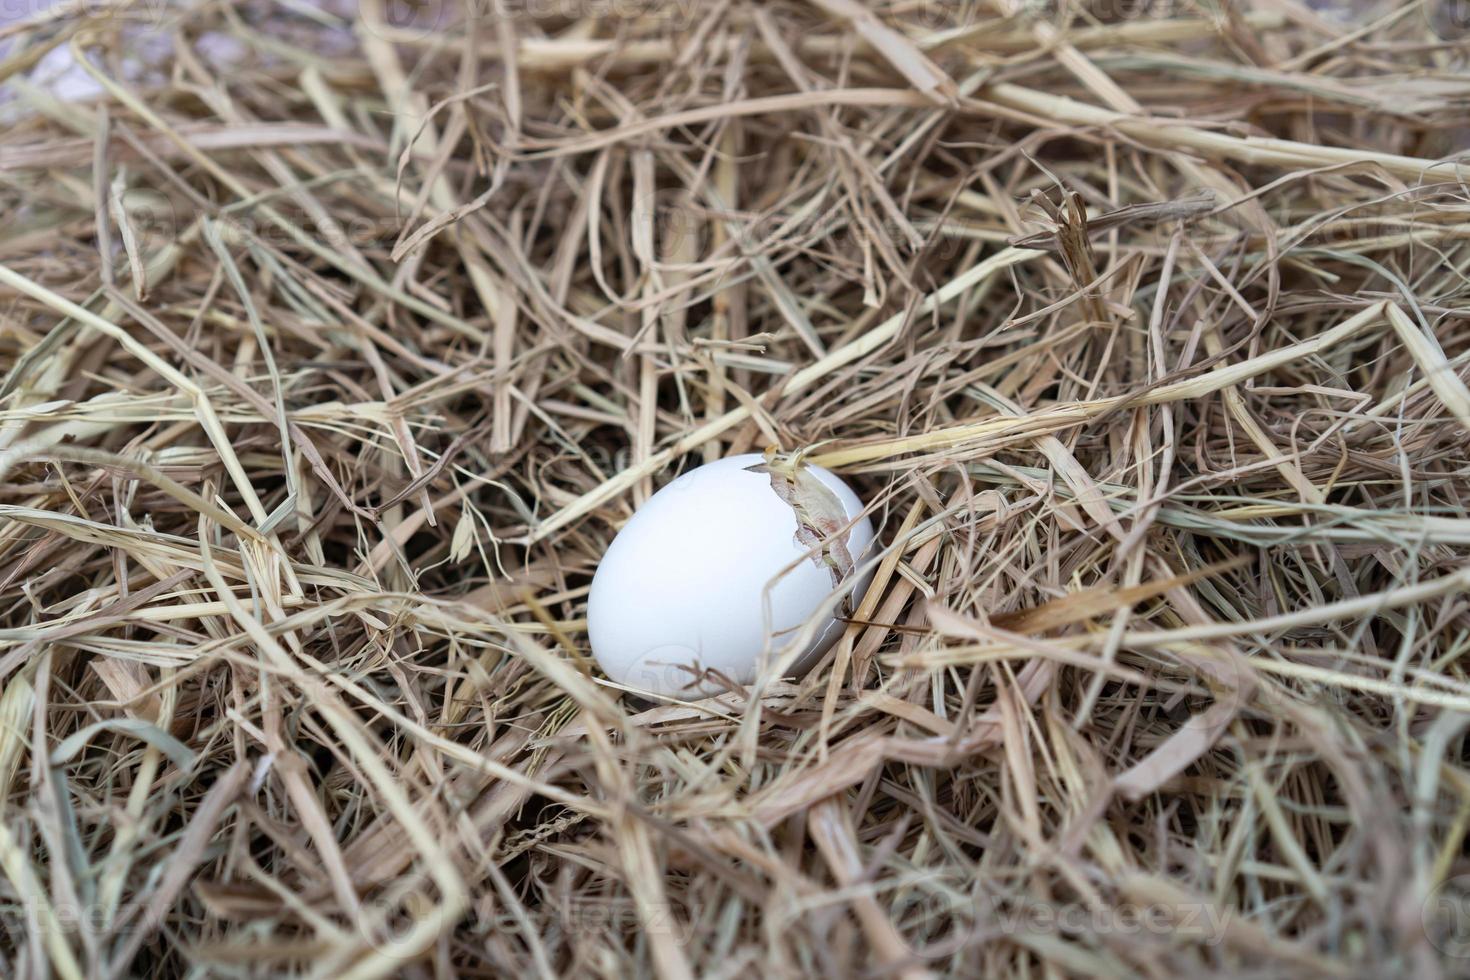 The Leghorn chick newborn was hatched from an egg in the nest. photo